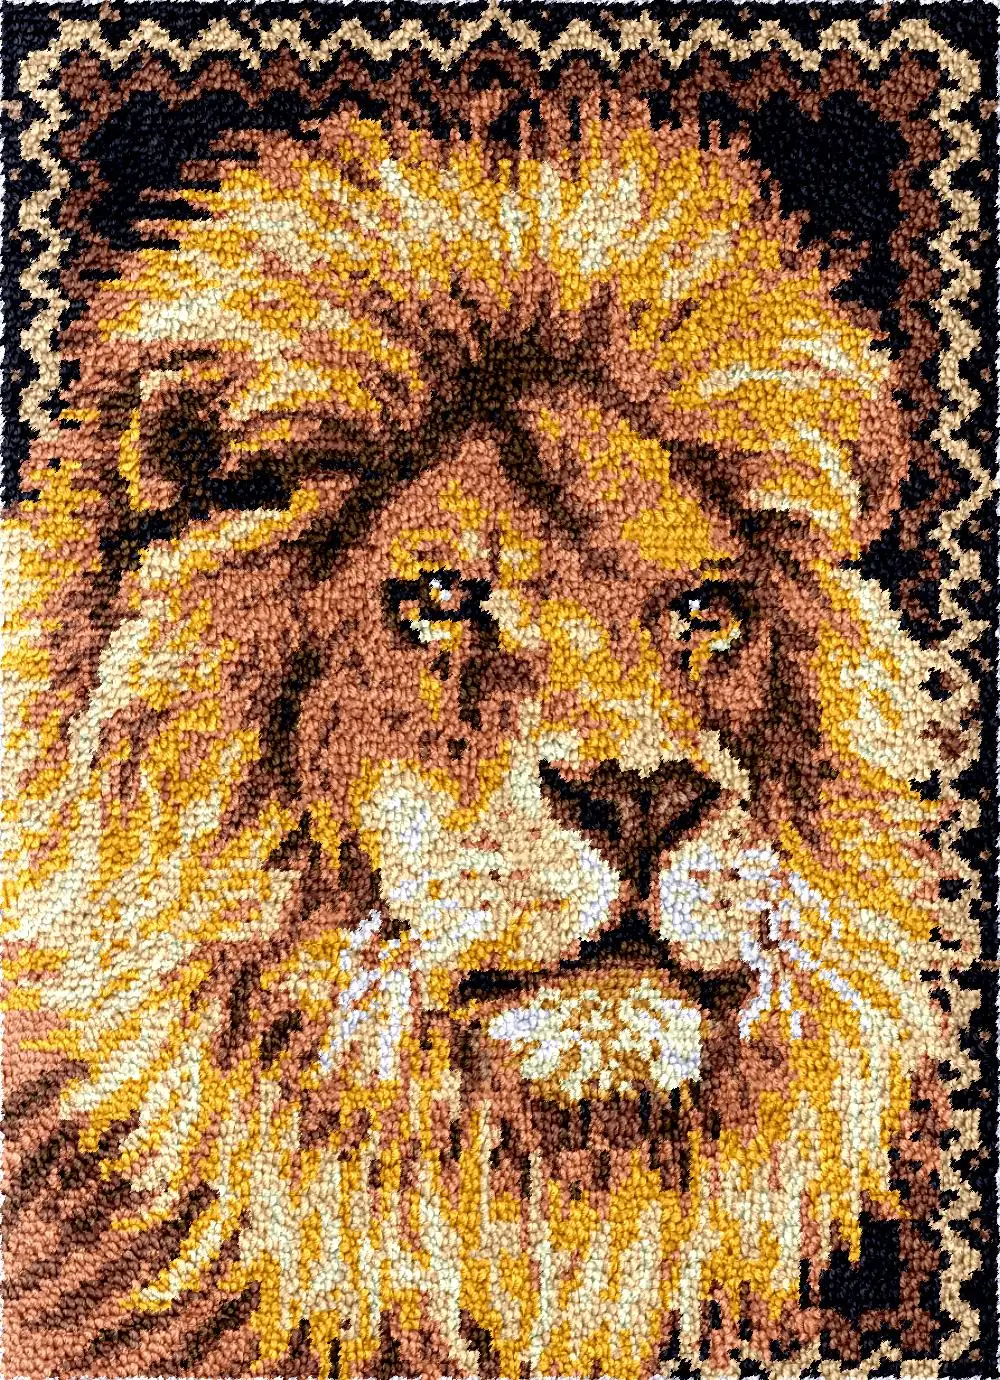 

Lion latch hook rug kits Carpet embroidery set crafts accessories and materials Tapestry DIY bag art plastic canvas Hobby making